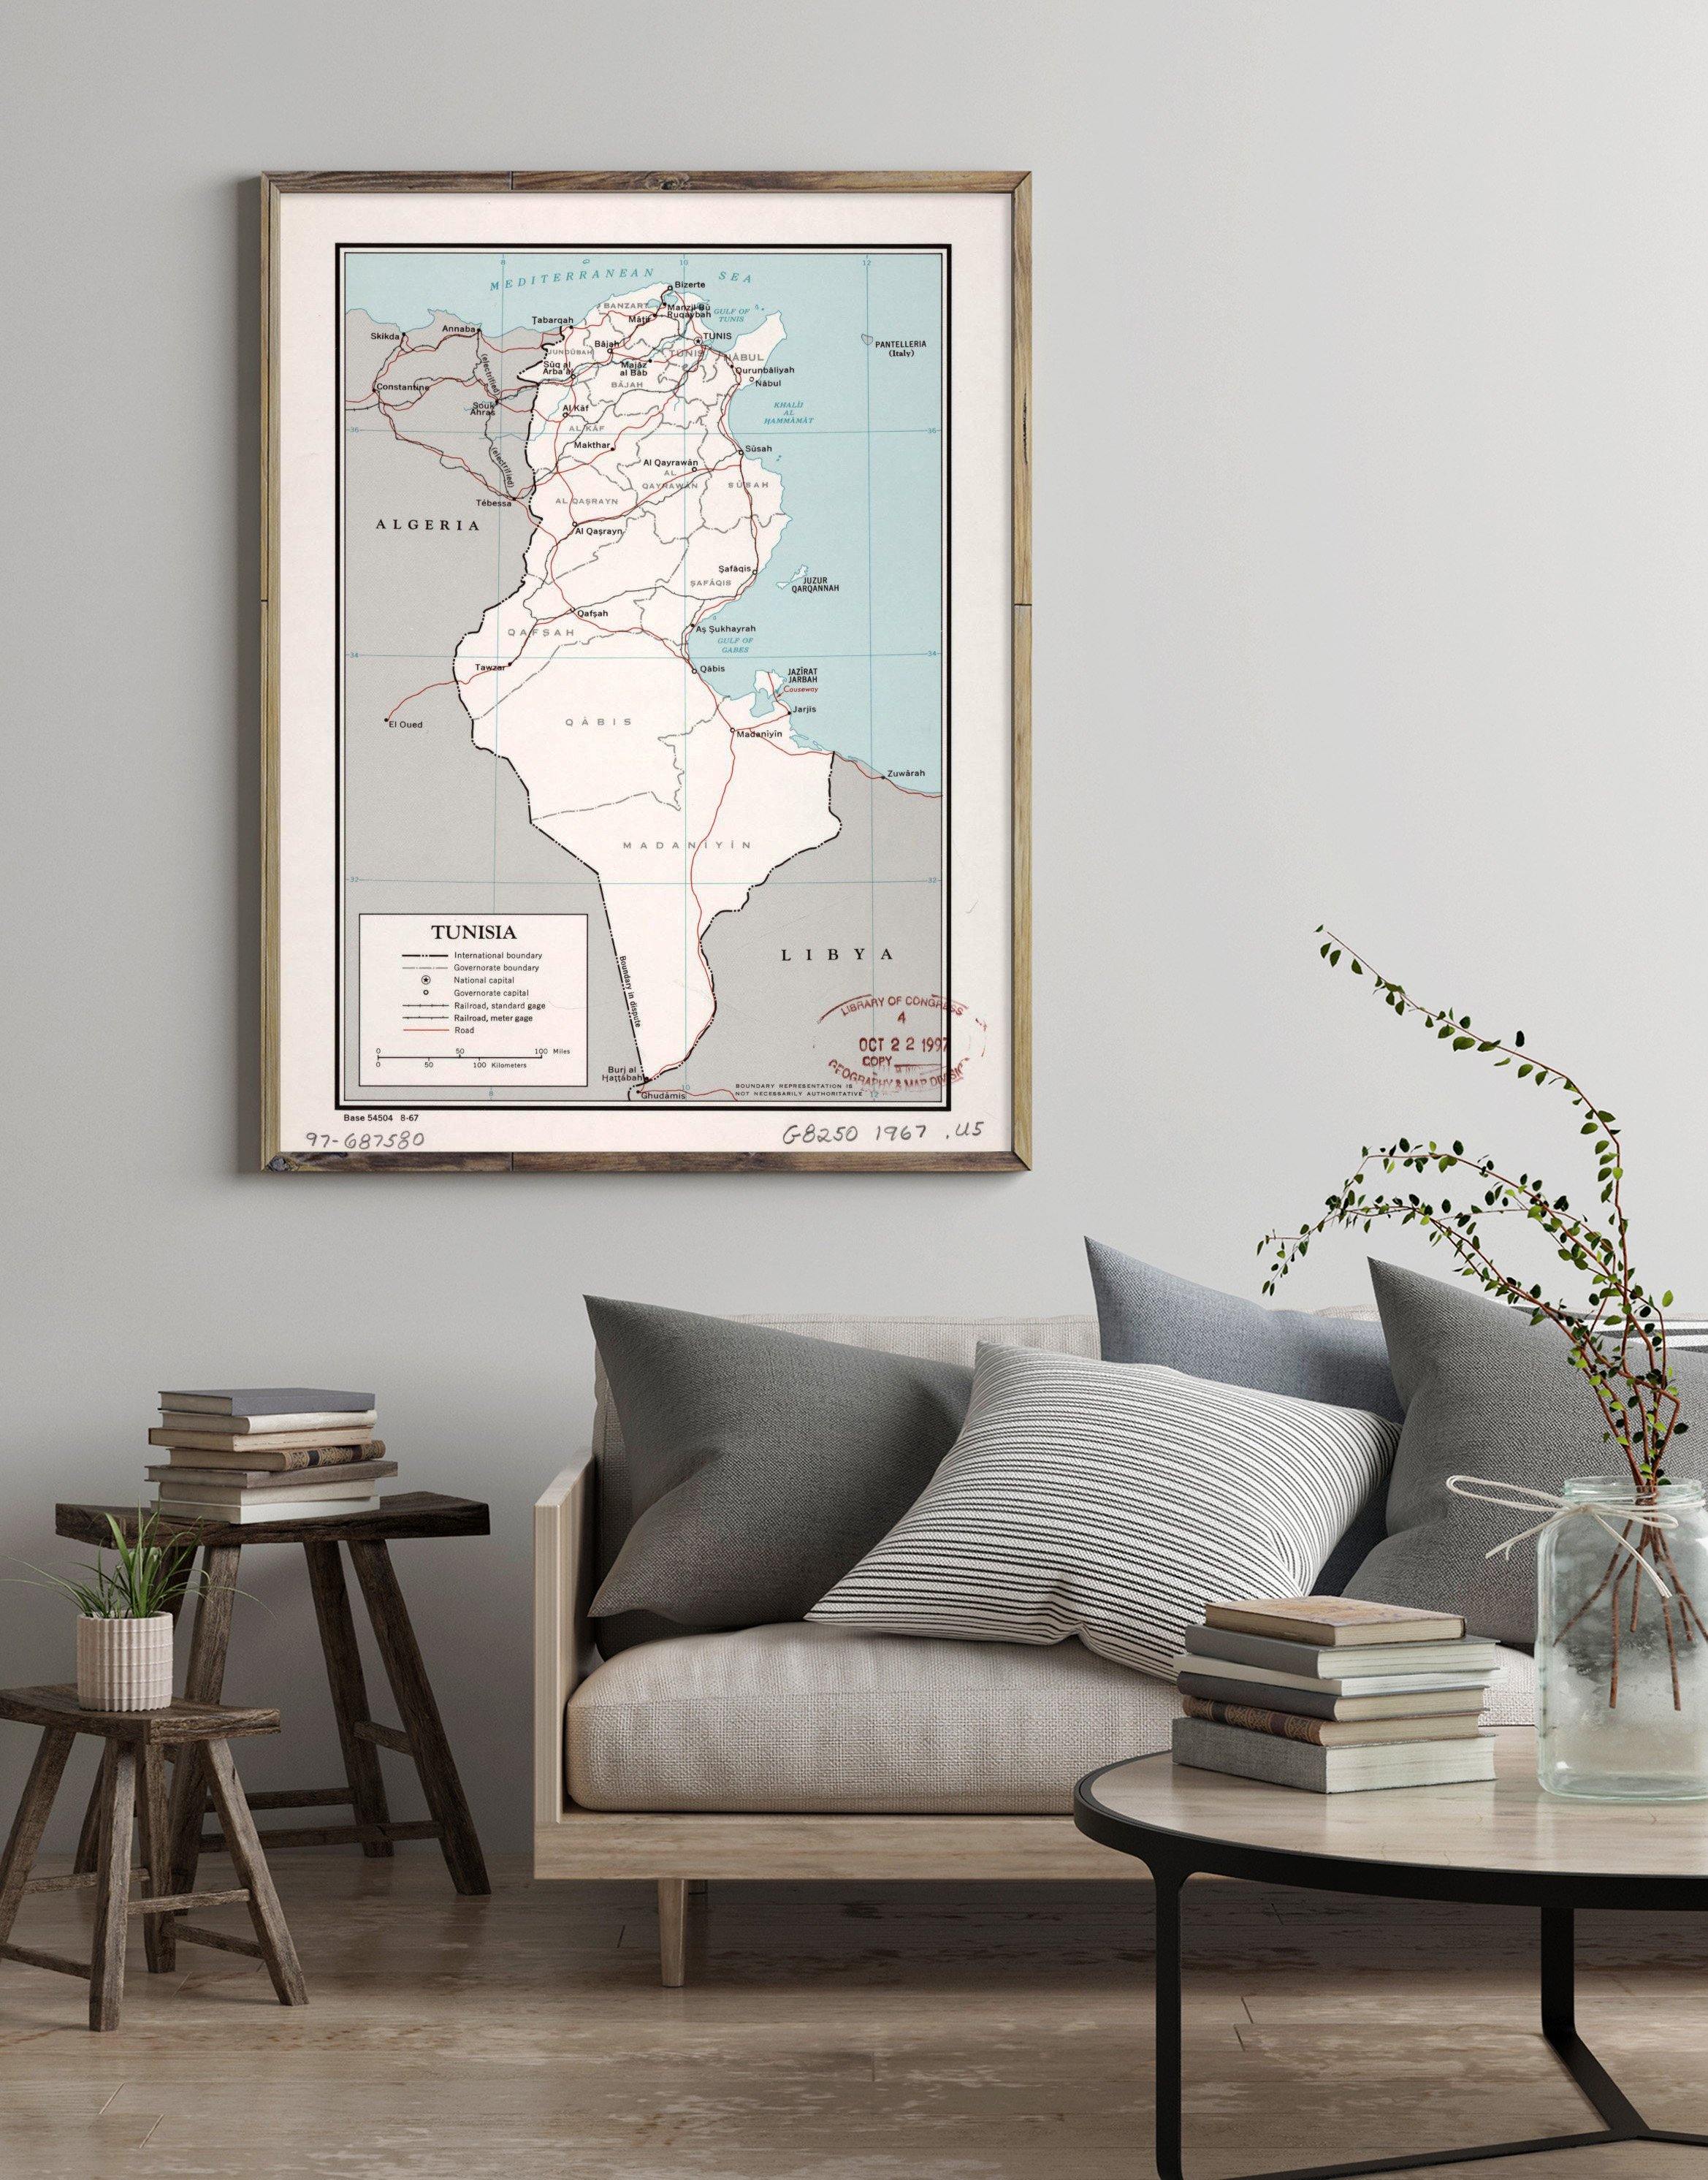 1967 Map| Tunisia| Tunisia Map Size: 18 inches x 24 inches |Fits 18x24 - New York Map Company